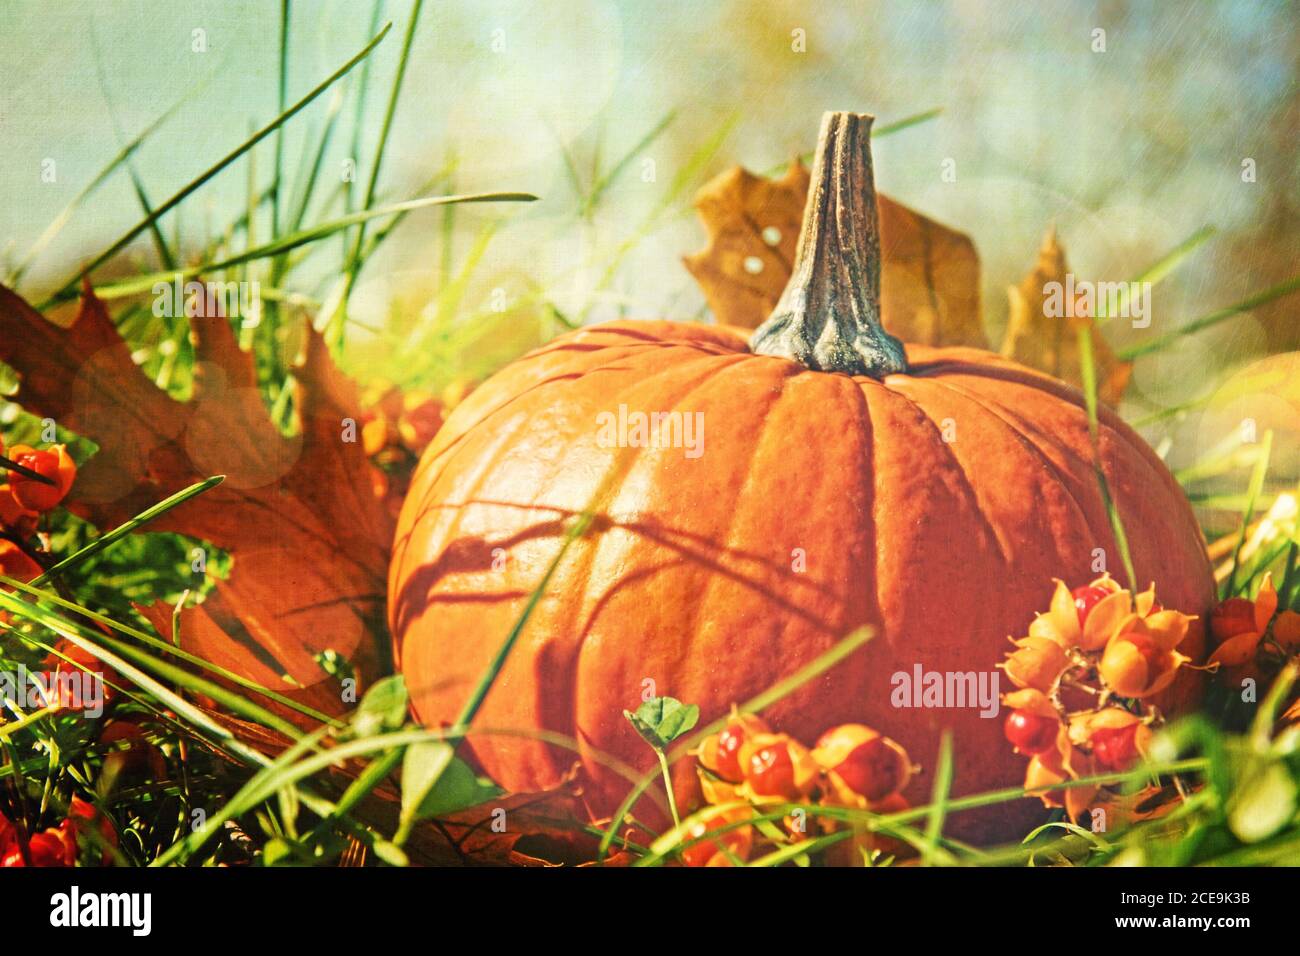 Small pumpkin in the grass with vintage color feel Stock Photo